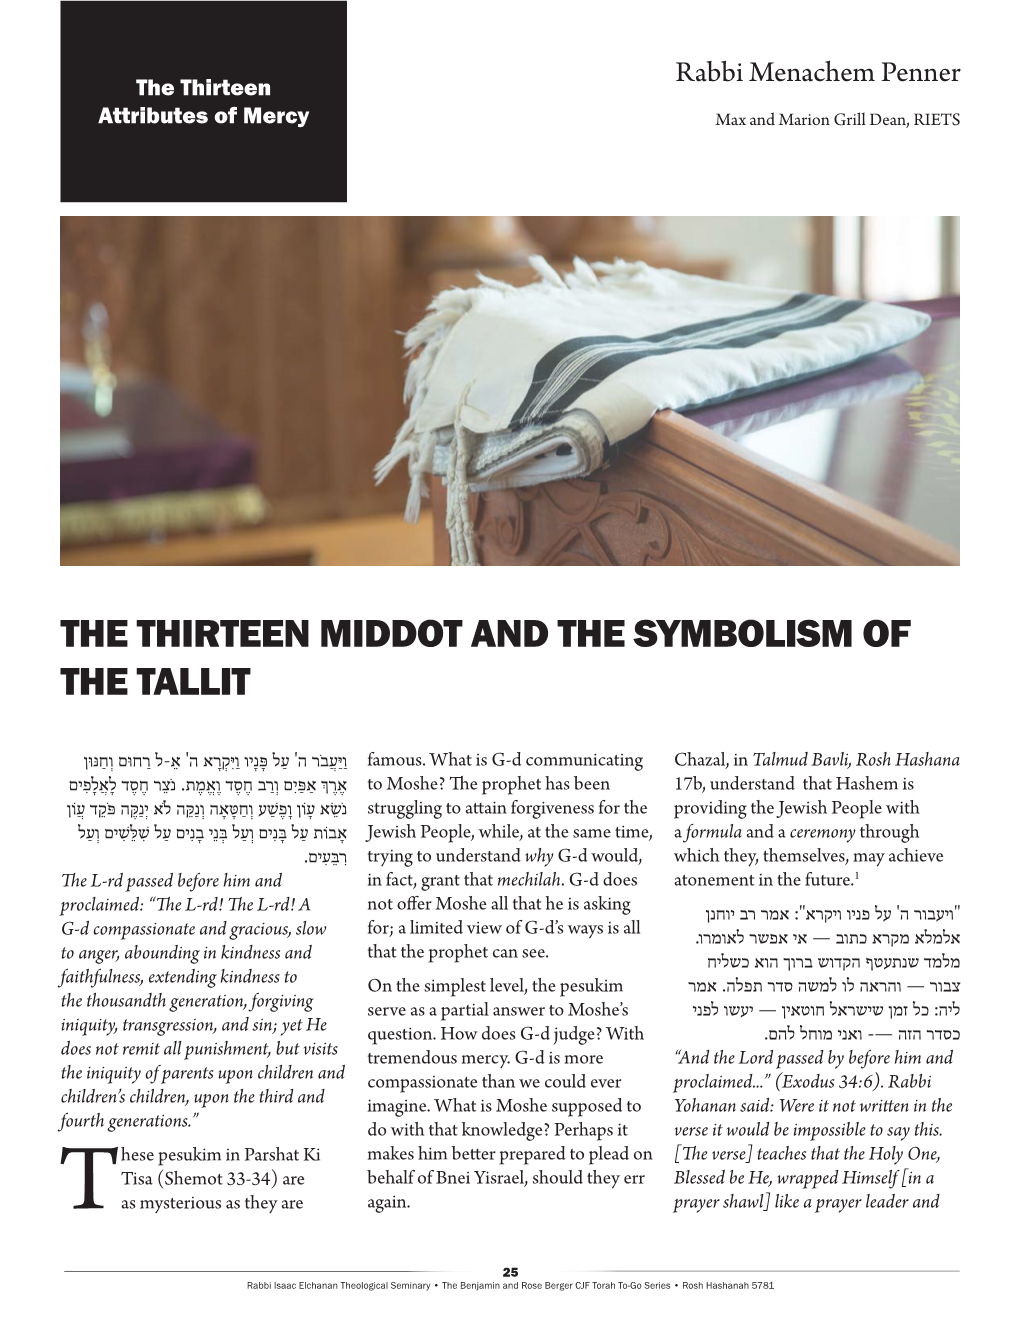 The Thirteen Middot and the Symbolism of the Tallit